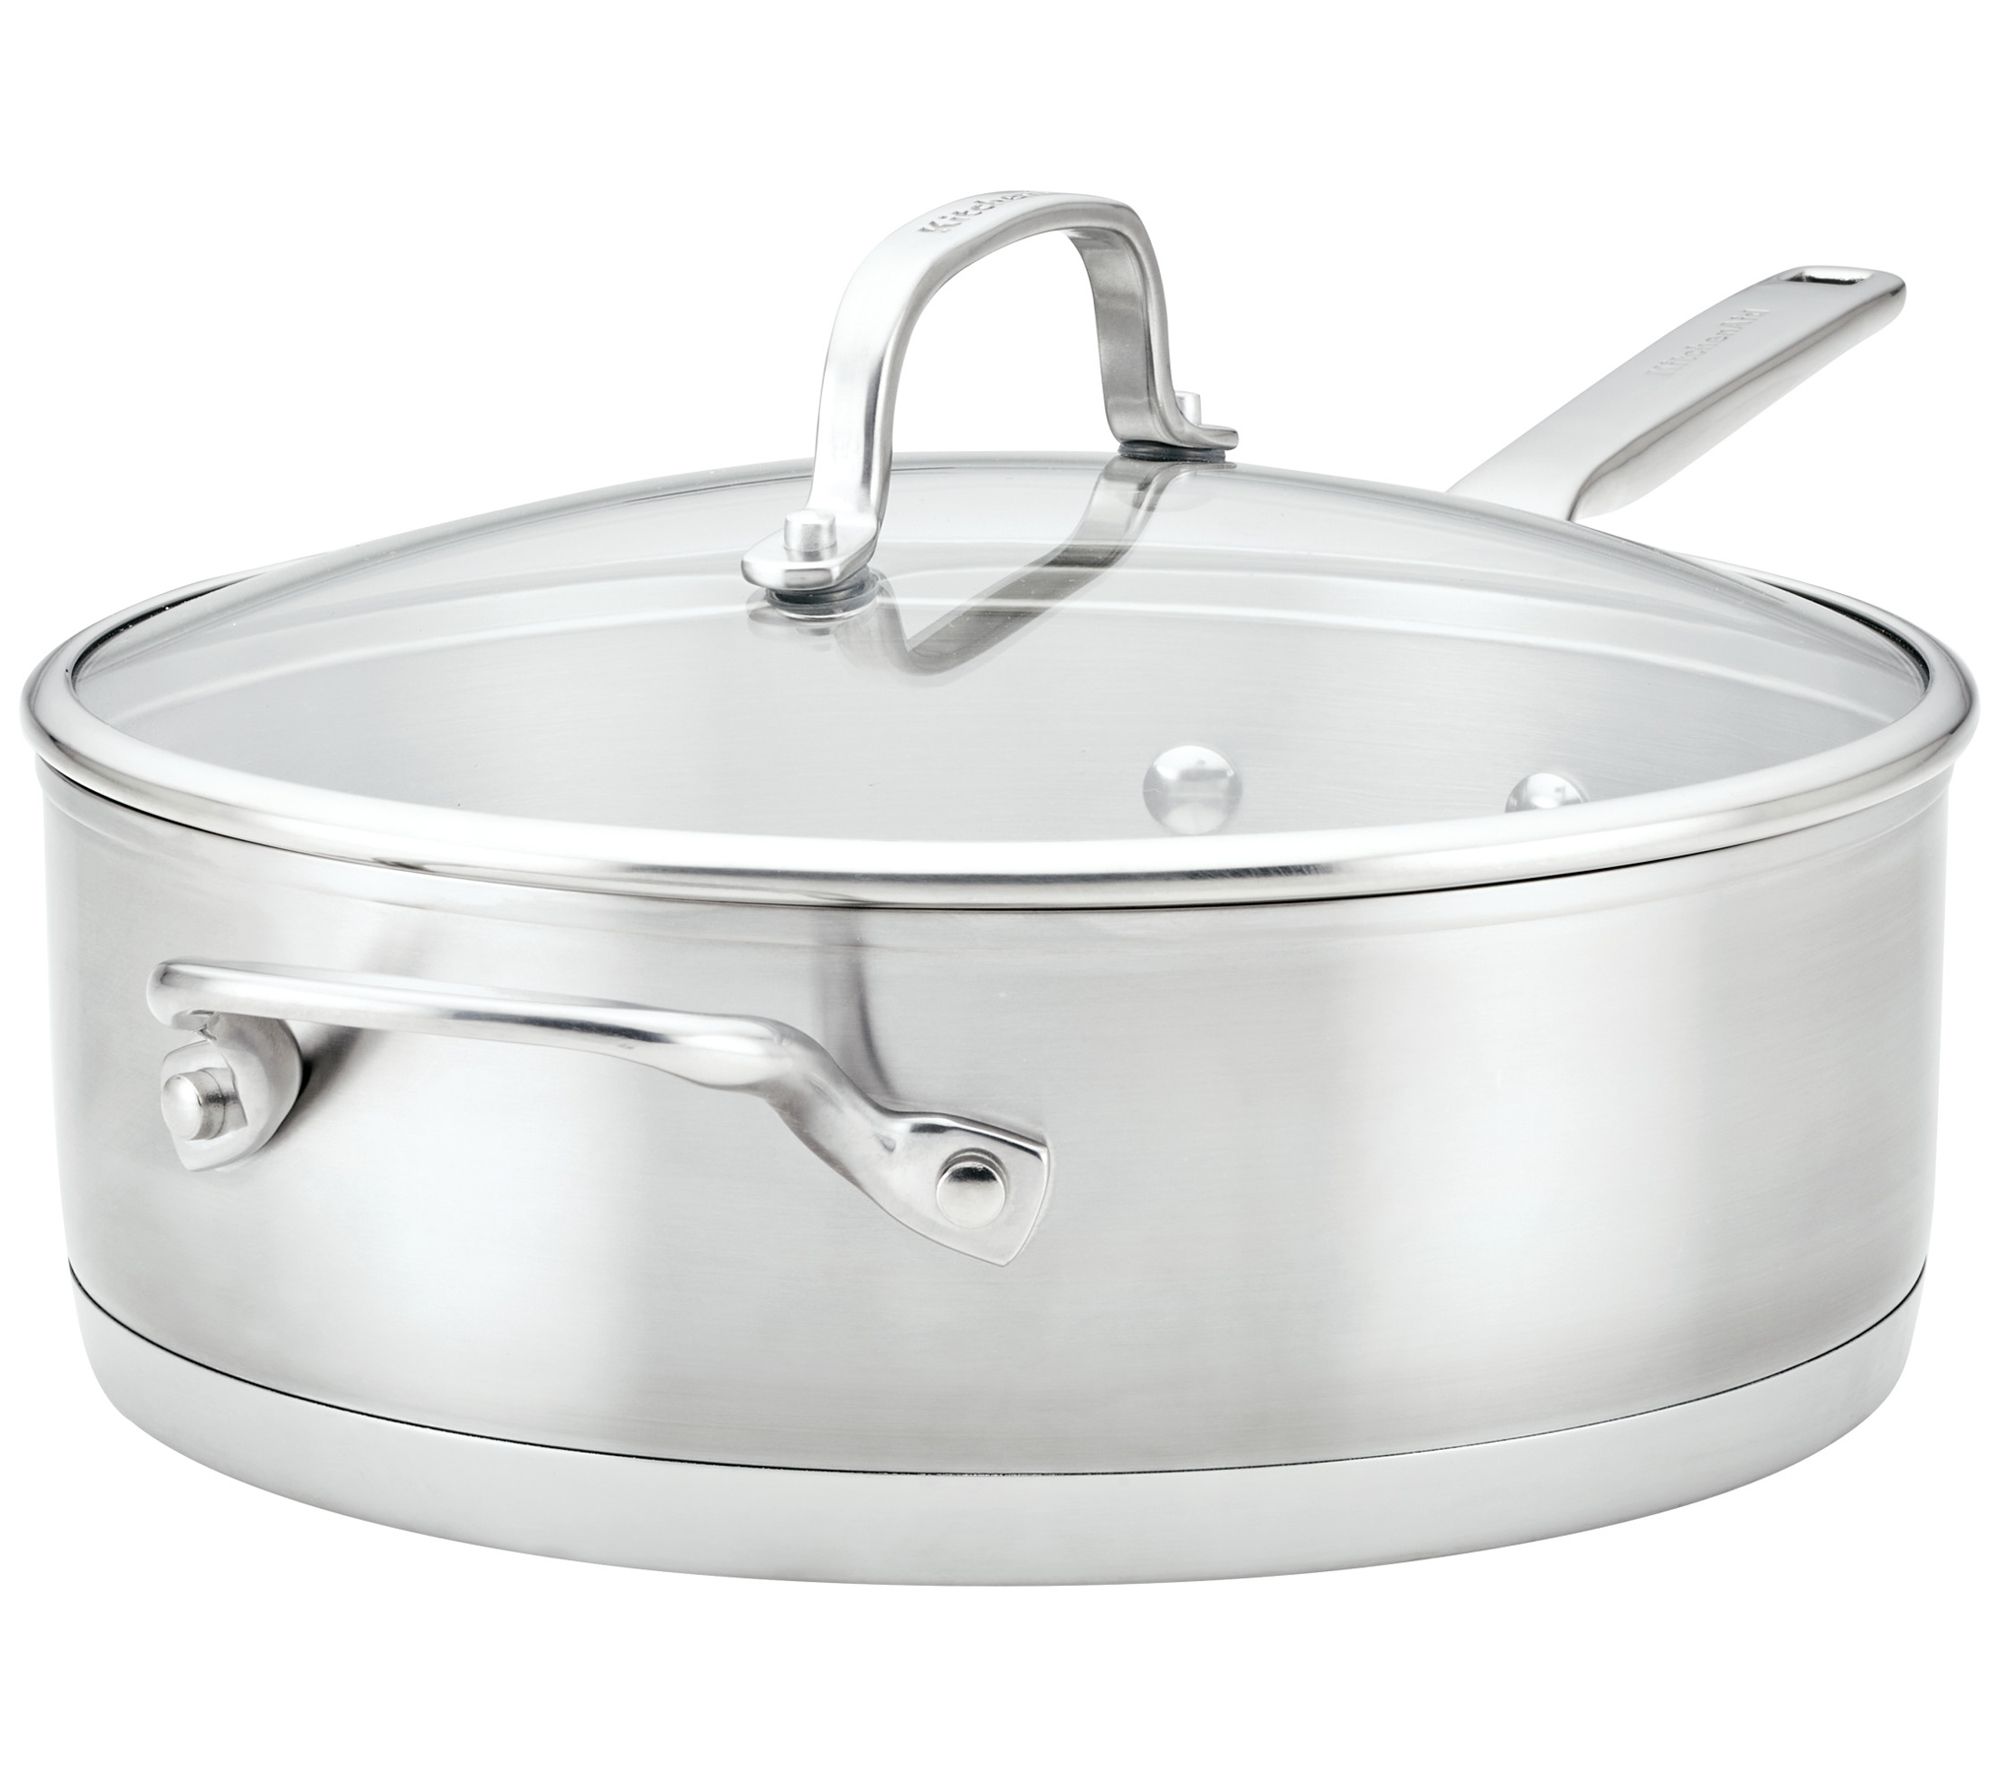 KitchenAid 5-Ply Clad Polished Stainless Steel Stock Pot/Stockpot with Lid,  6 Quart